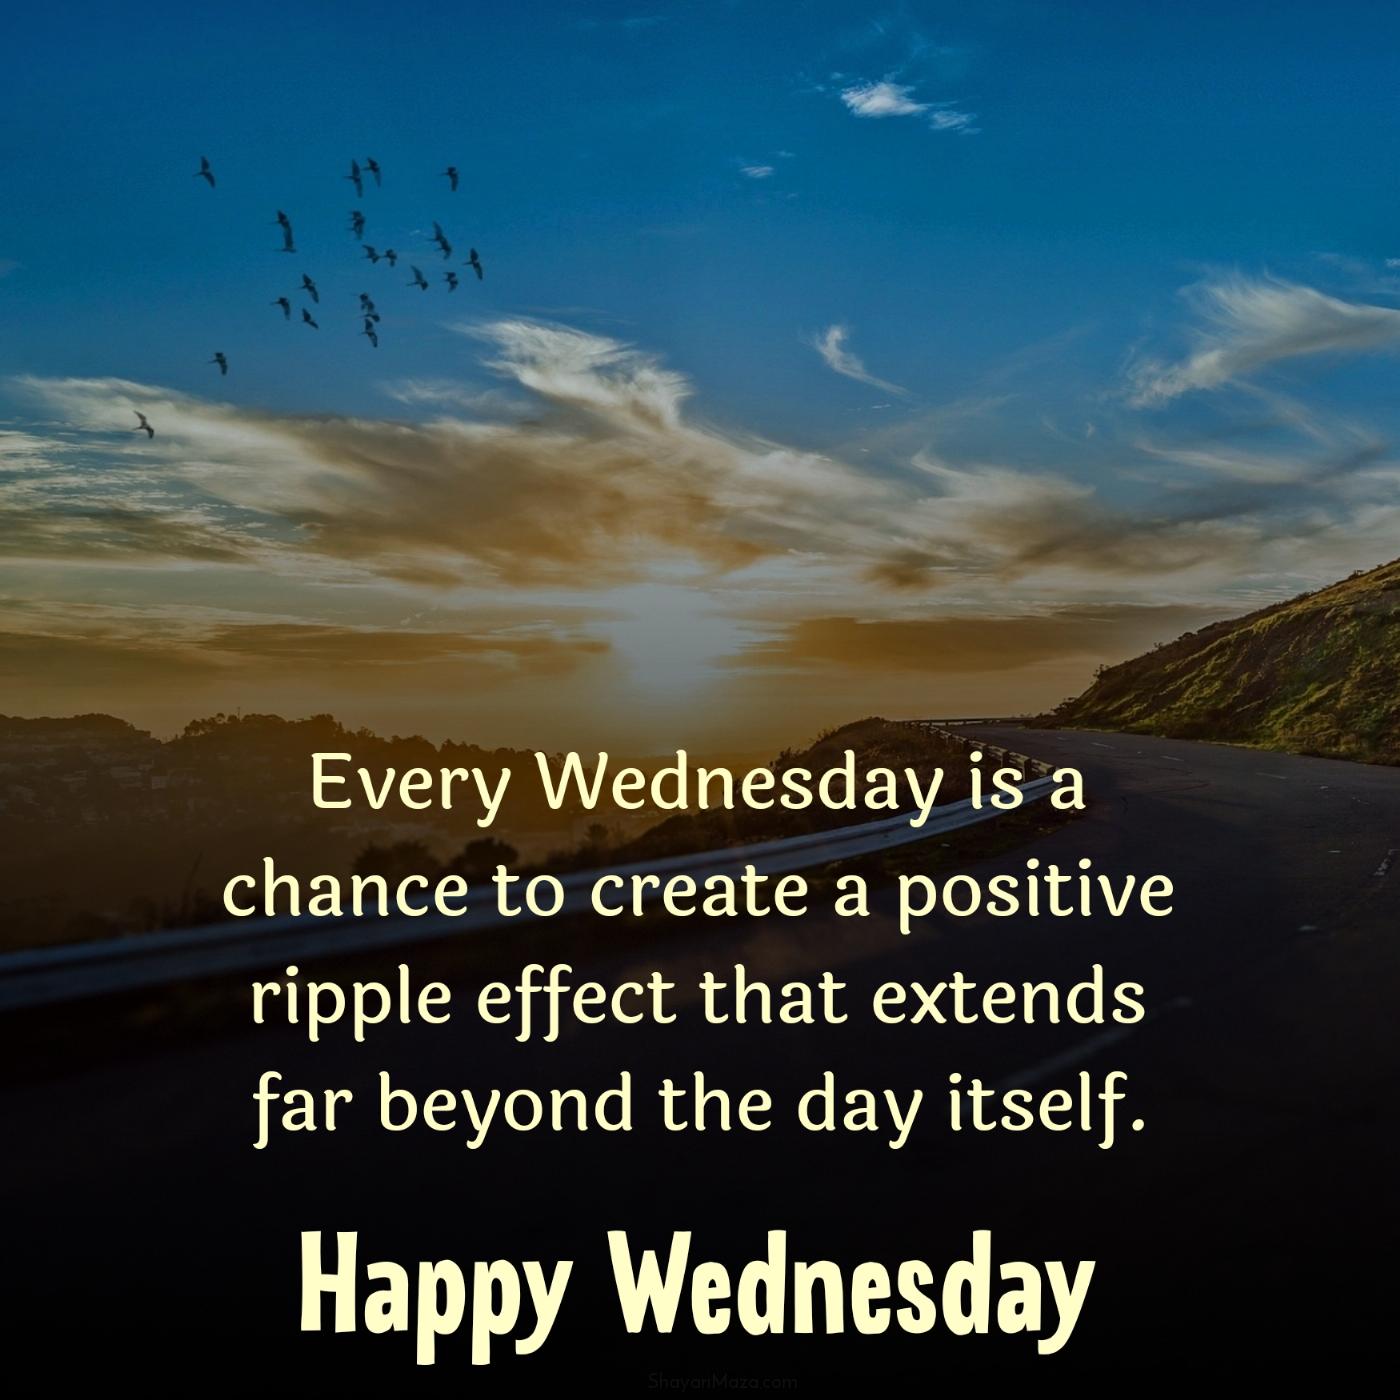 Every Wednesday is a chance to create a positive ripple effect